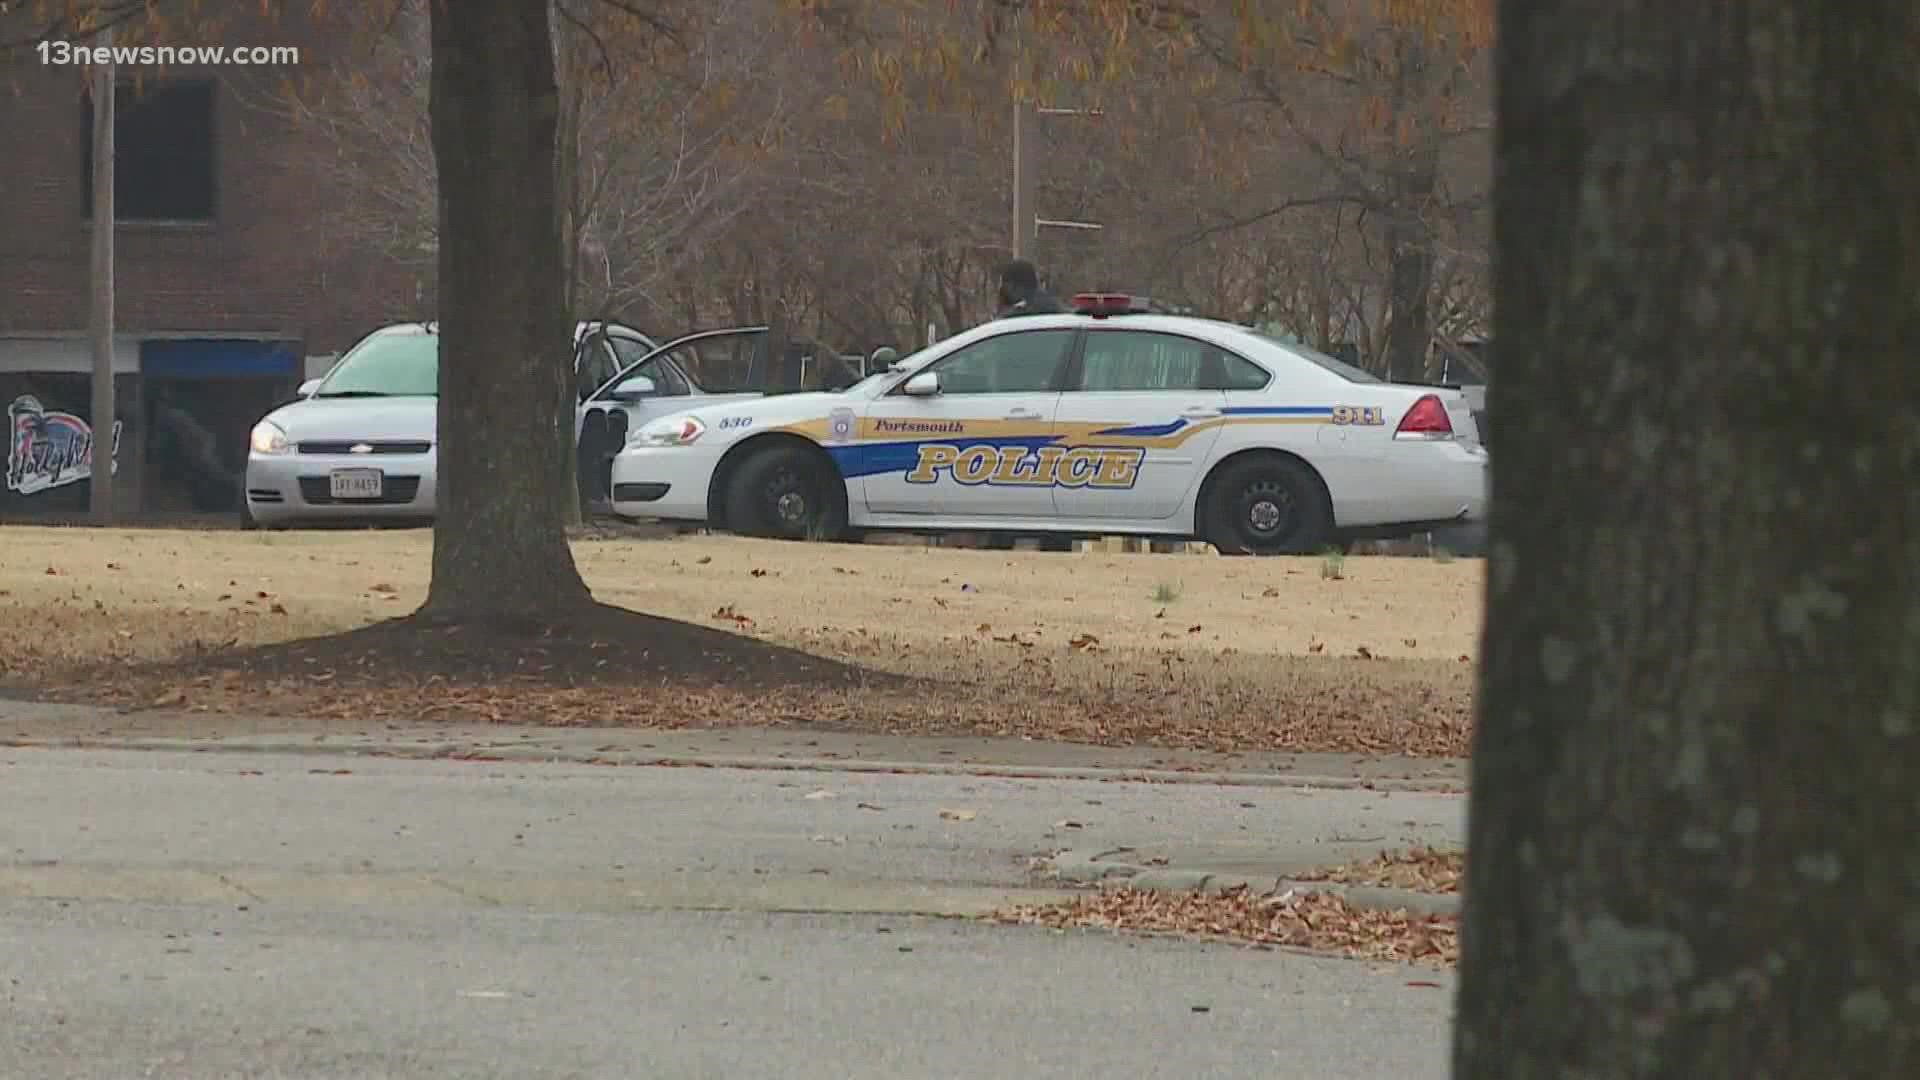 I.C. High School in Portsmouth dismisses early after lockdown